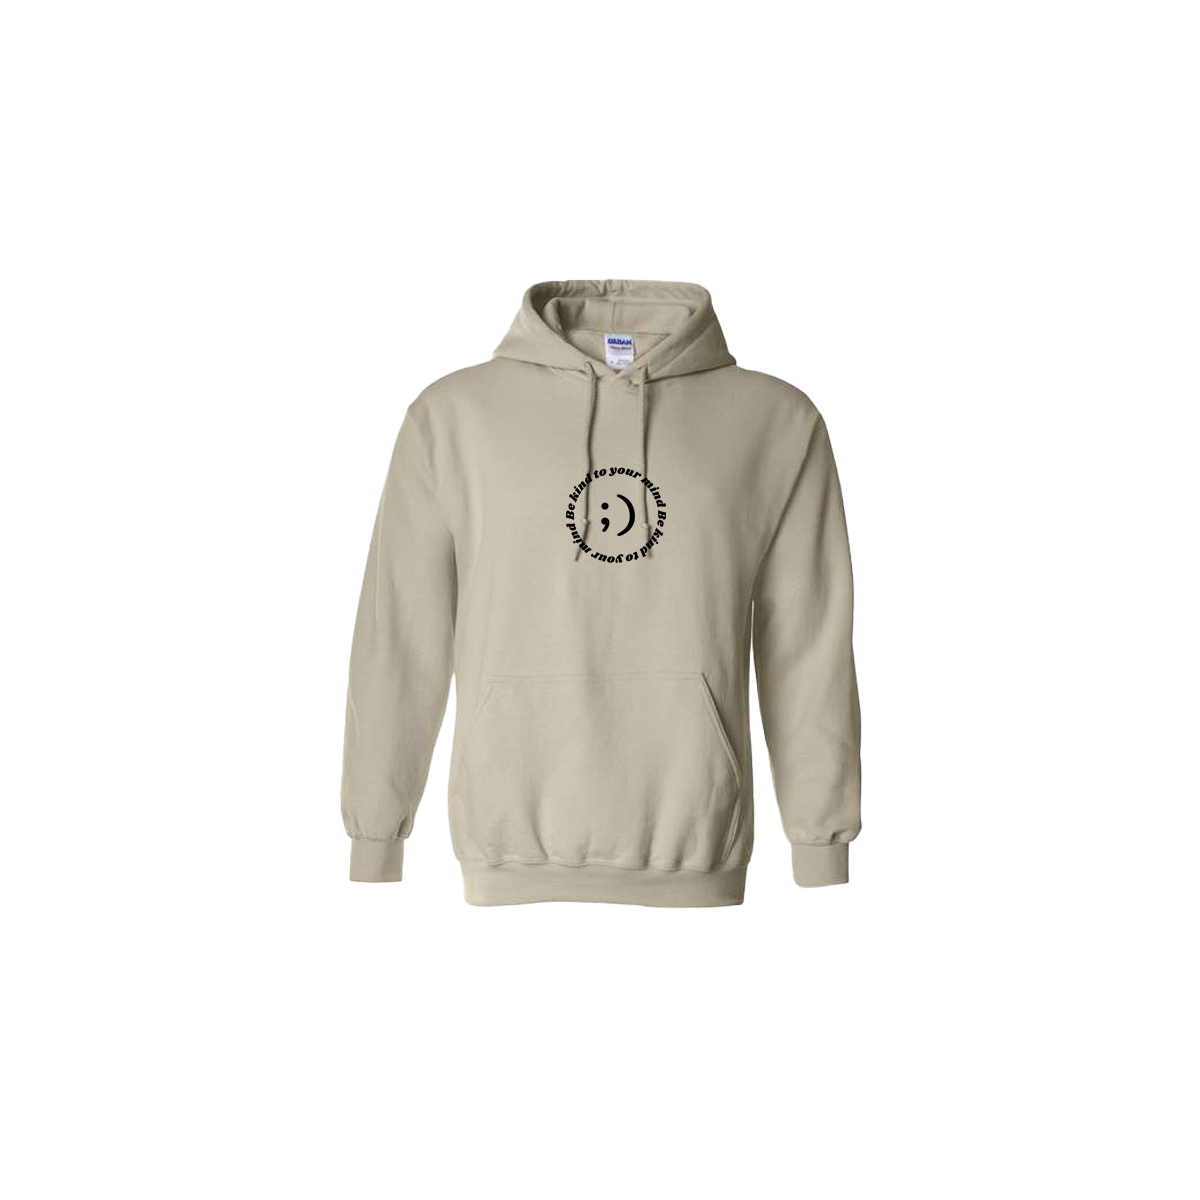 Be Kind To Your Mind Embroidered Beige Hoodie - Mental Health Awareness Clothing